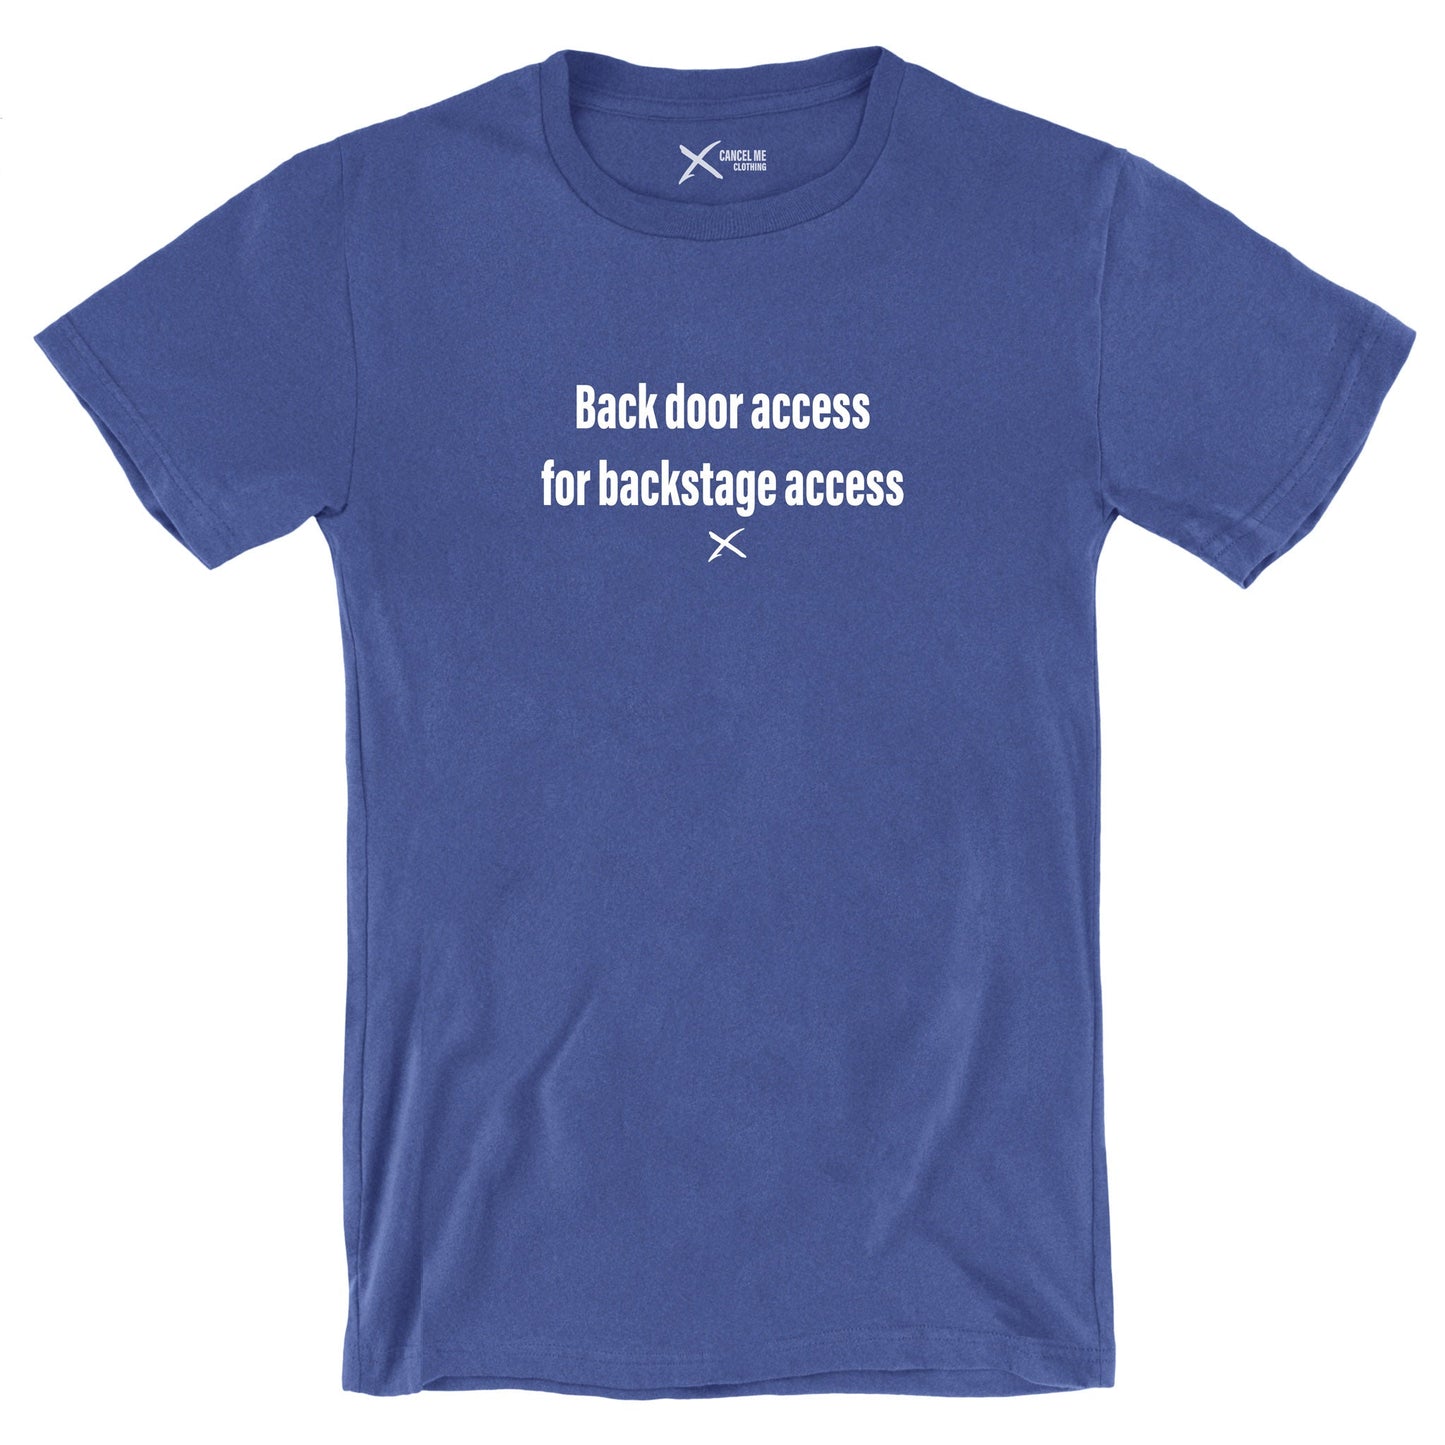 Back door access for backstage access - Shirt